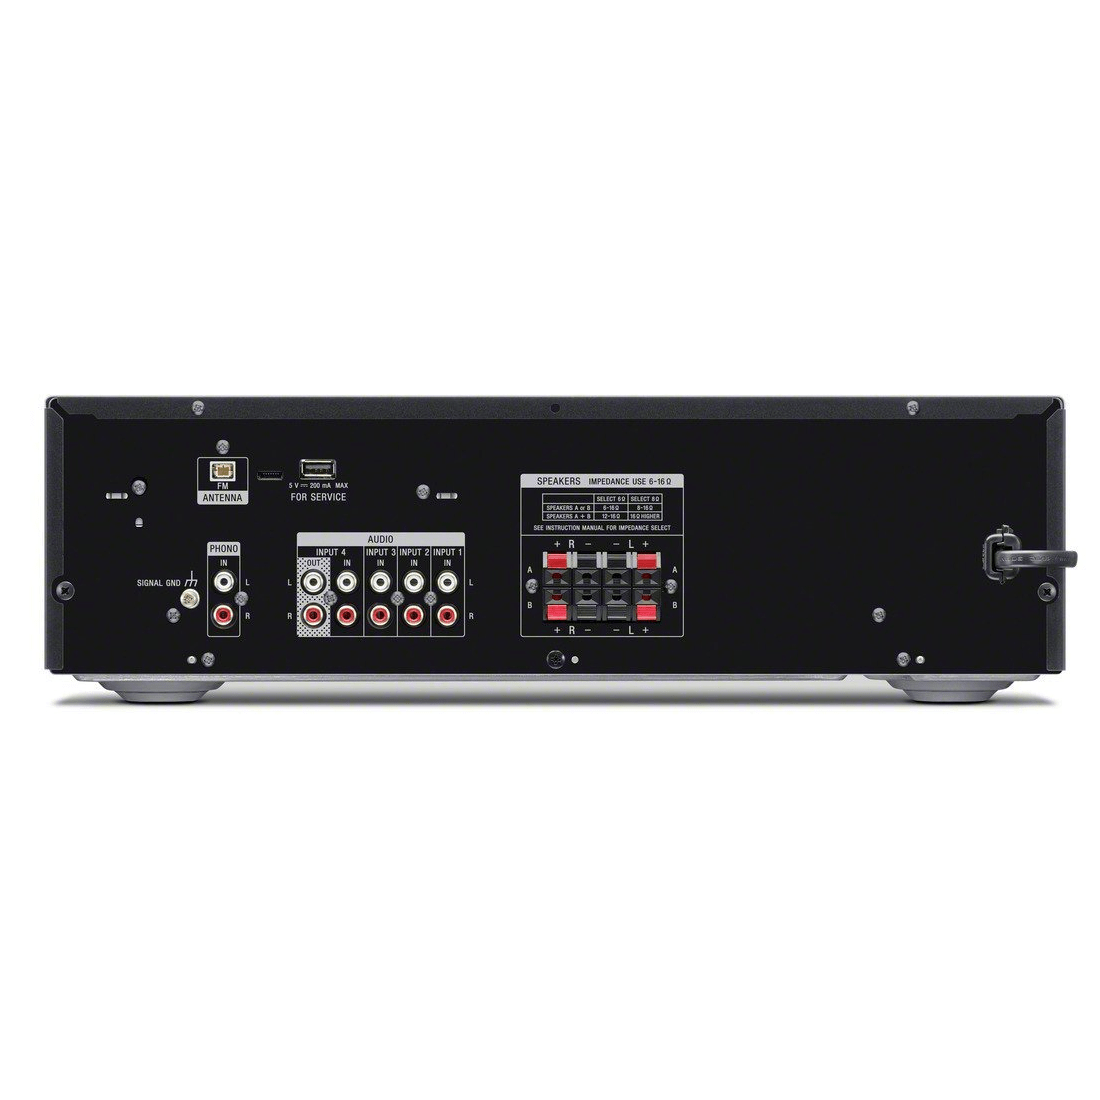 Sony STR-DH190 Stereo Receiver w/ Phono Input and Bluetooth Connectivity